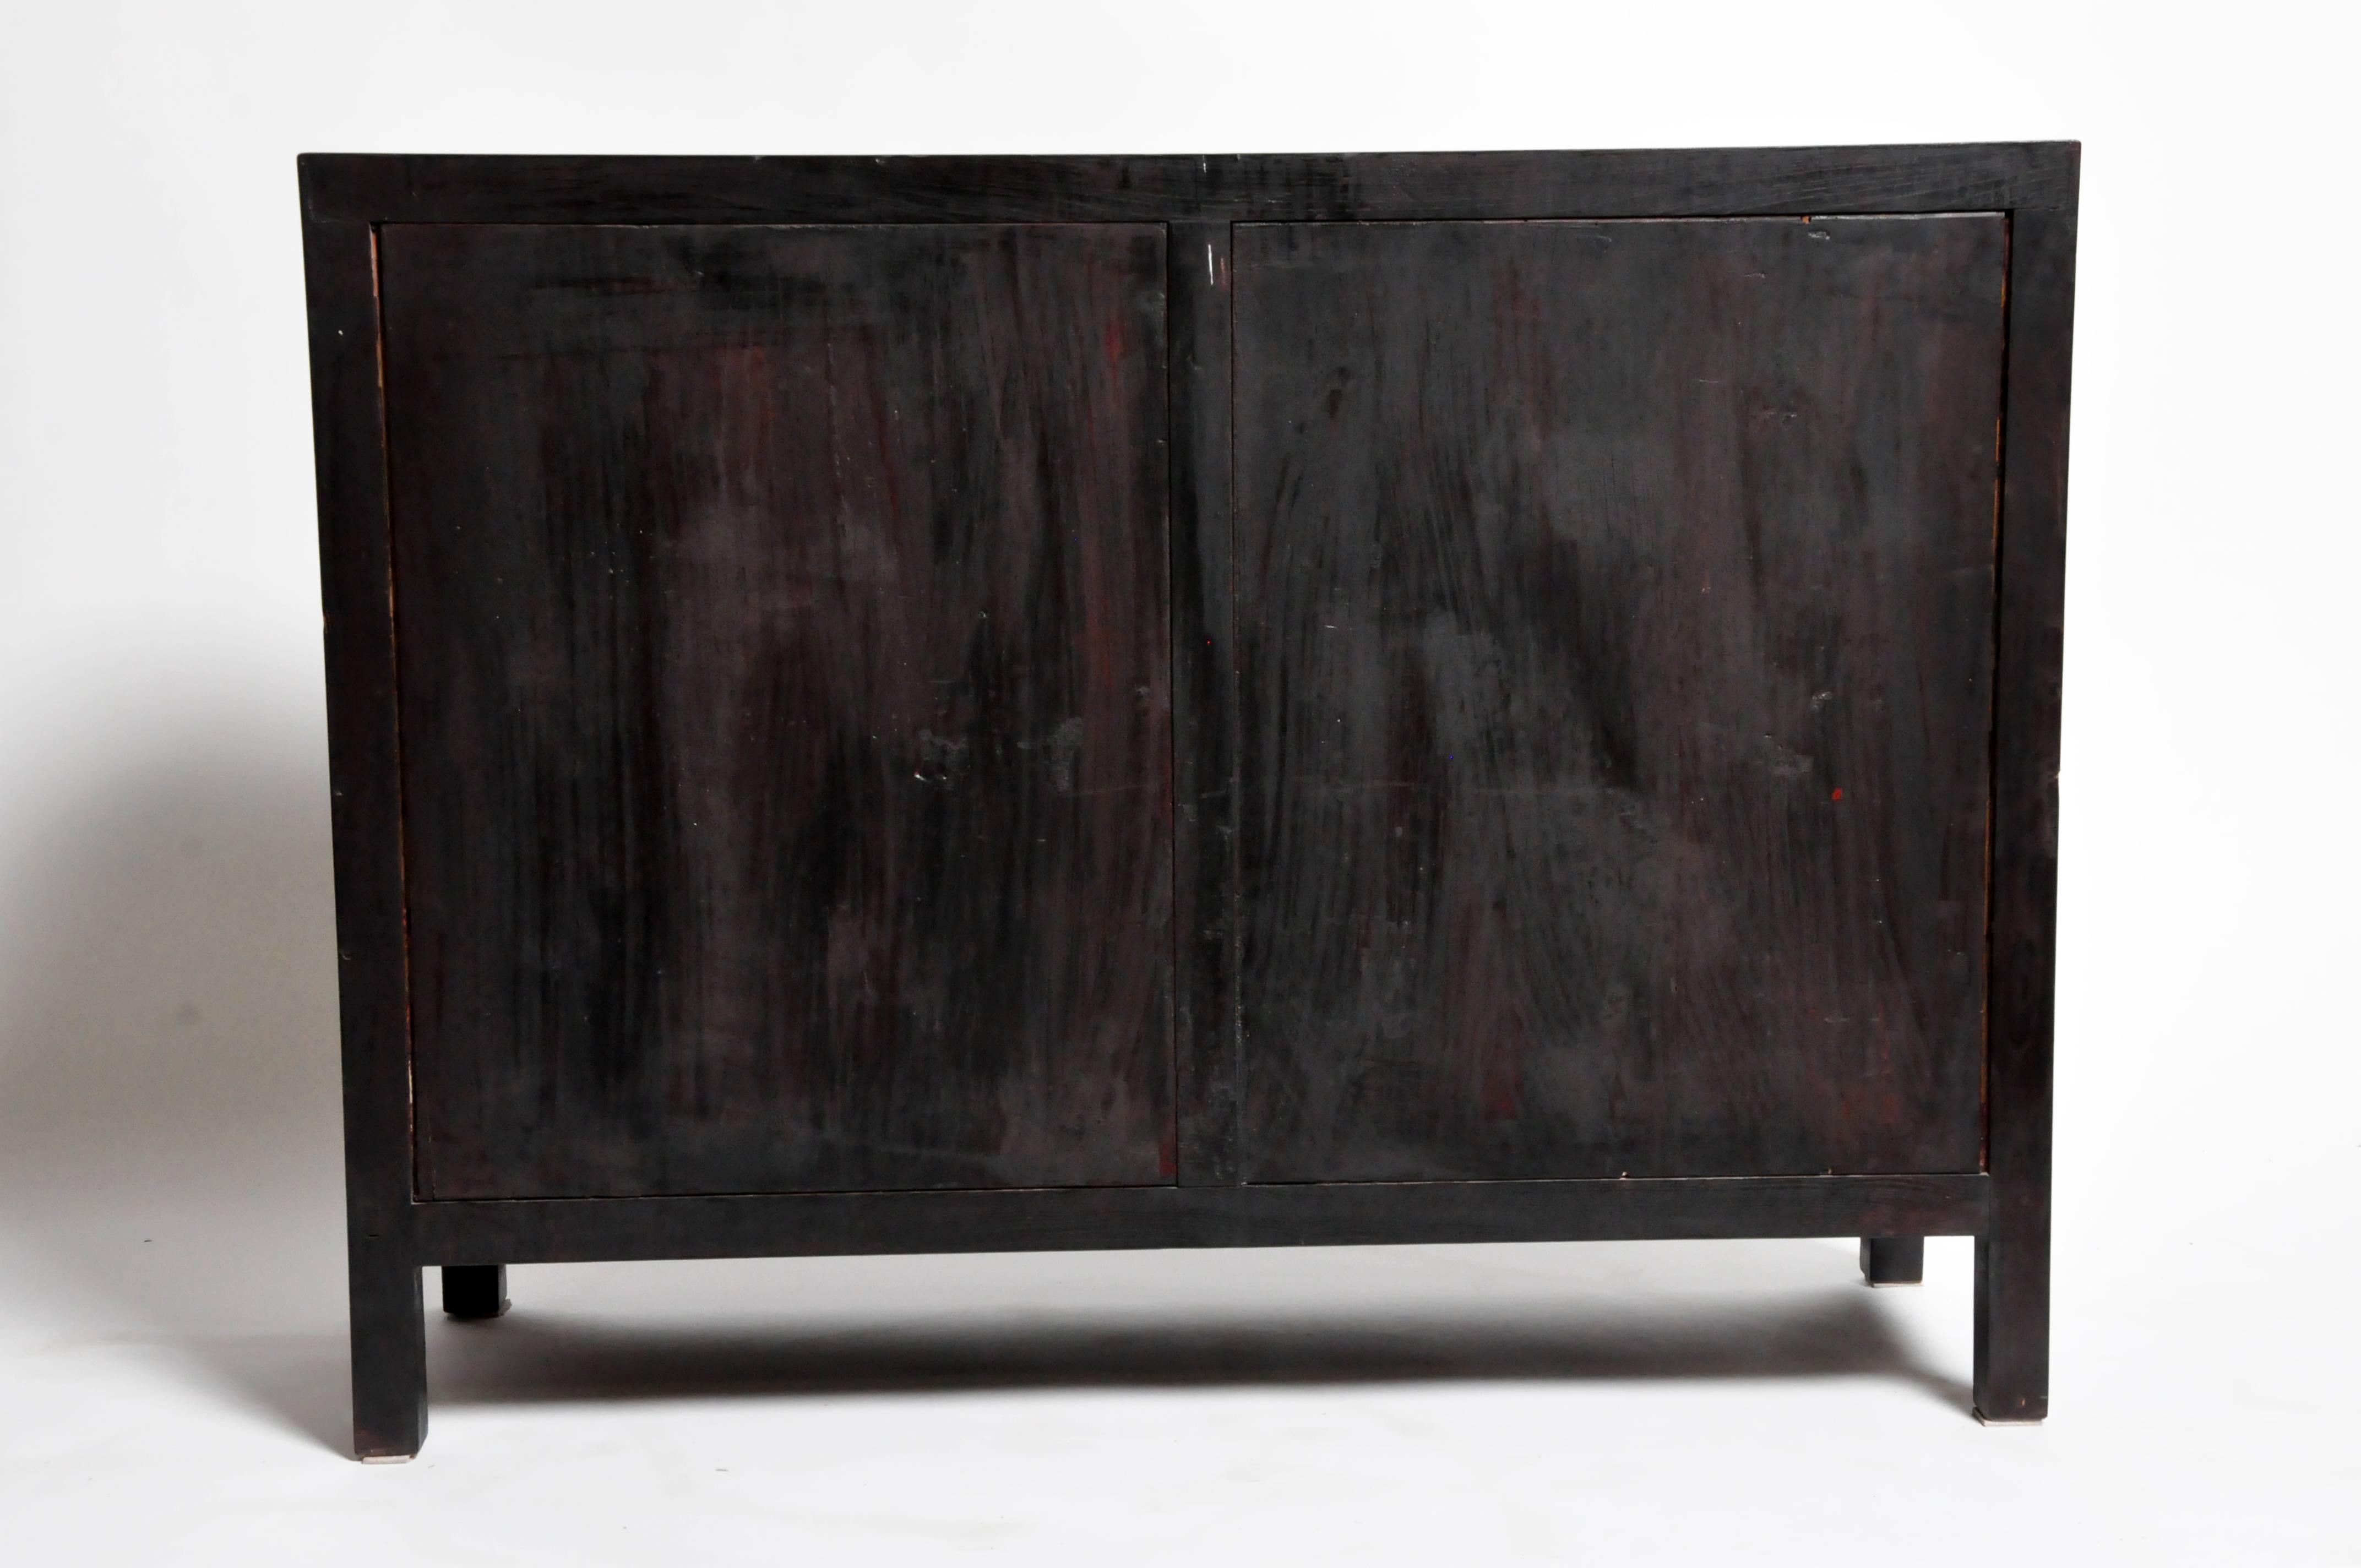 This sideboard is from Hebei, China and made from reclaimed yang wood. The piece features mortise and tenon joinery and interior a shelve for storage. You can also customize it and make your own. Wood, color, finish, and dimensions are all